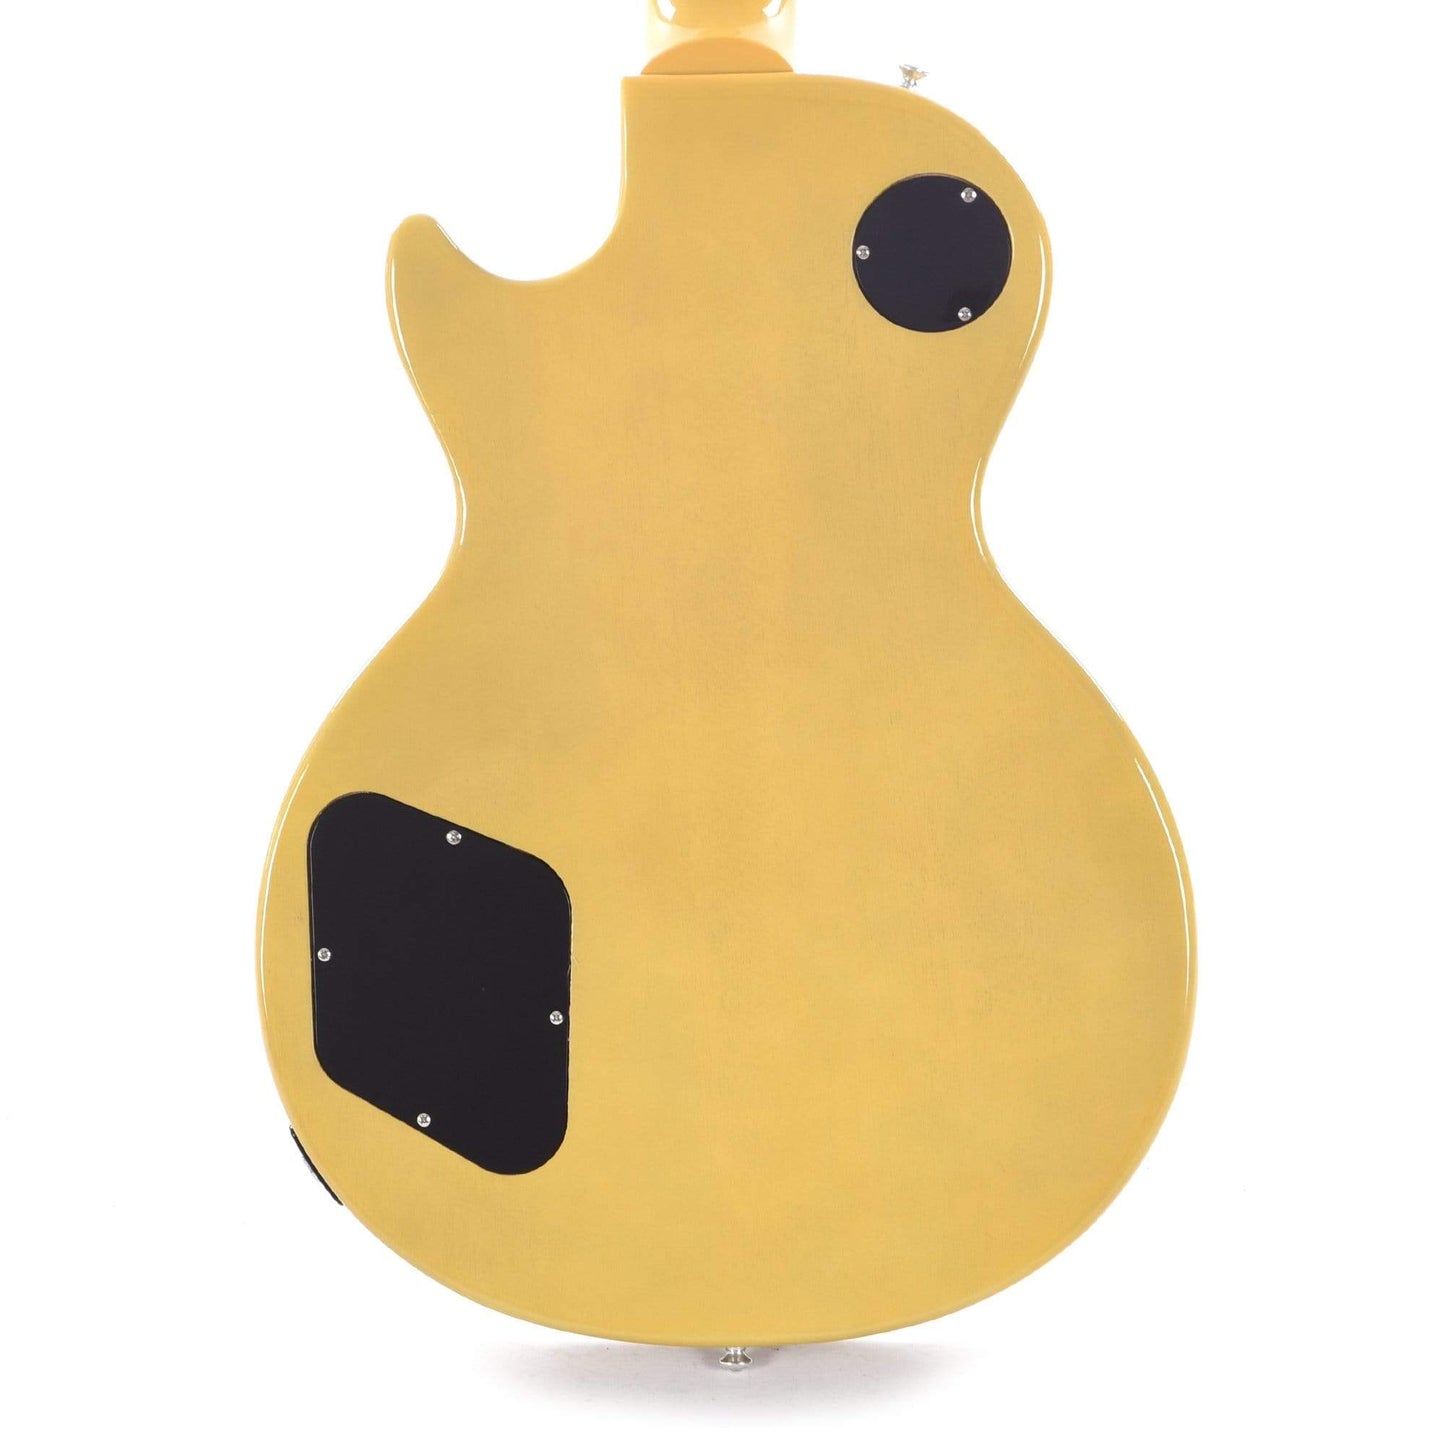 Gibson USA Les Paul Special TV Yellow Electric Guitars / Solid Body